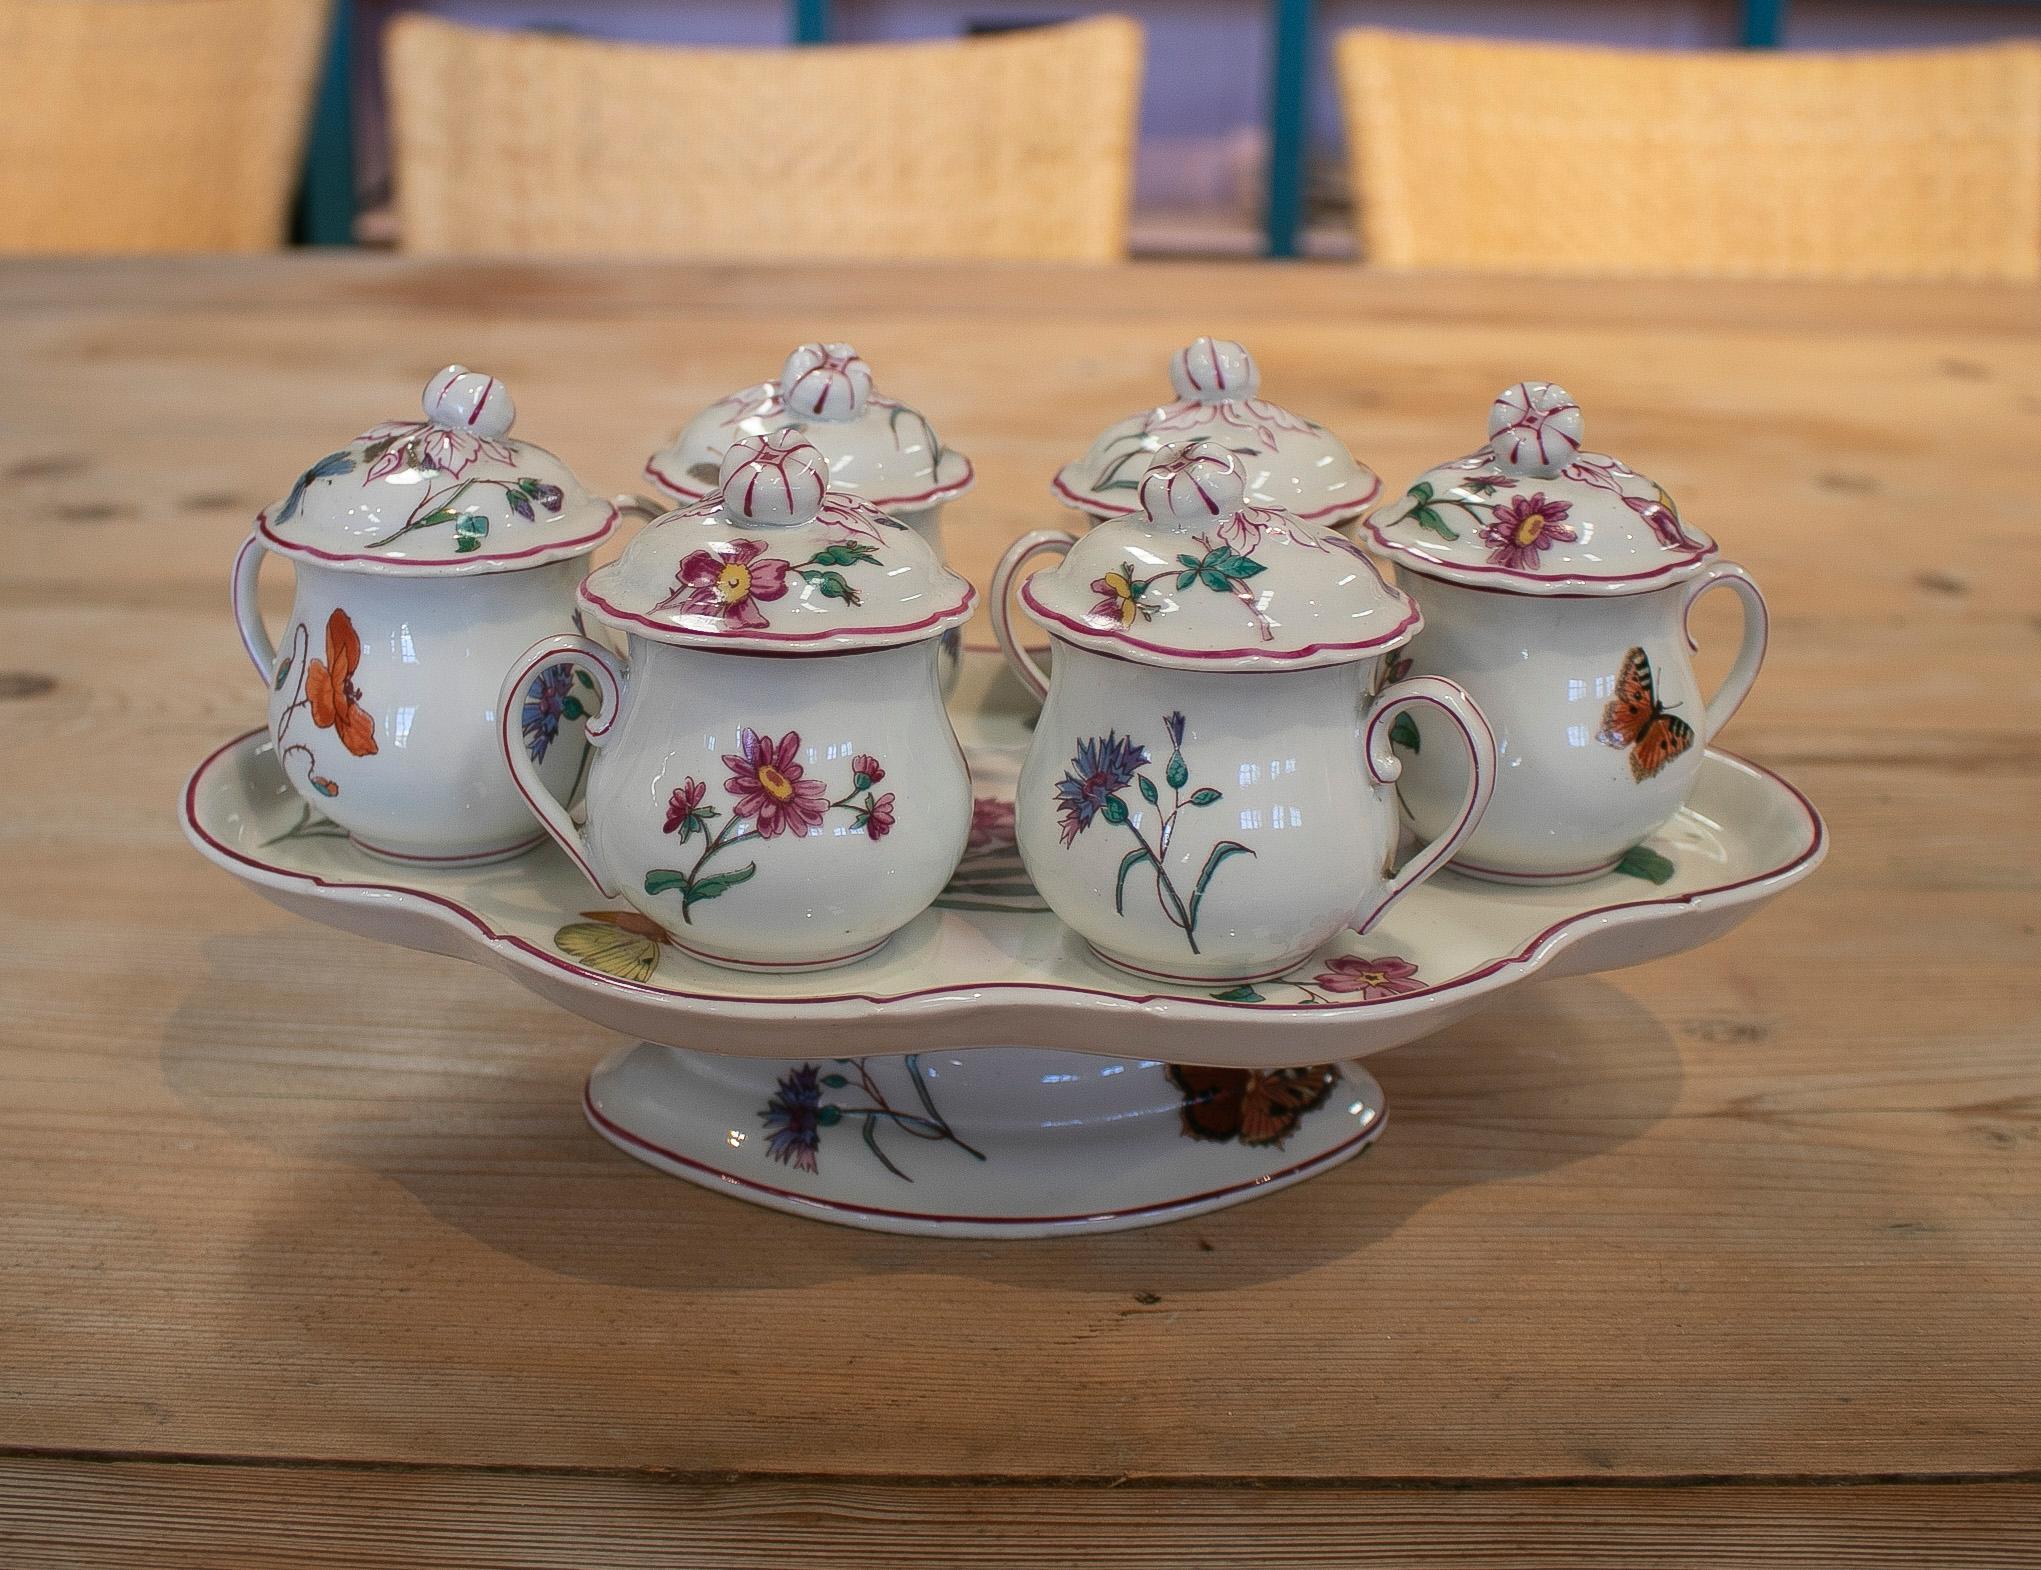 20th Century 1930s French Porcelain Tasse Trembleuse Chocolate Set w/ 6 Drinking Cups & Tray